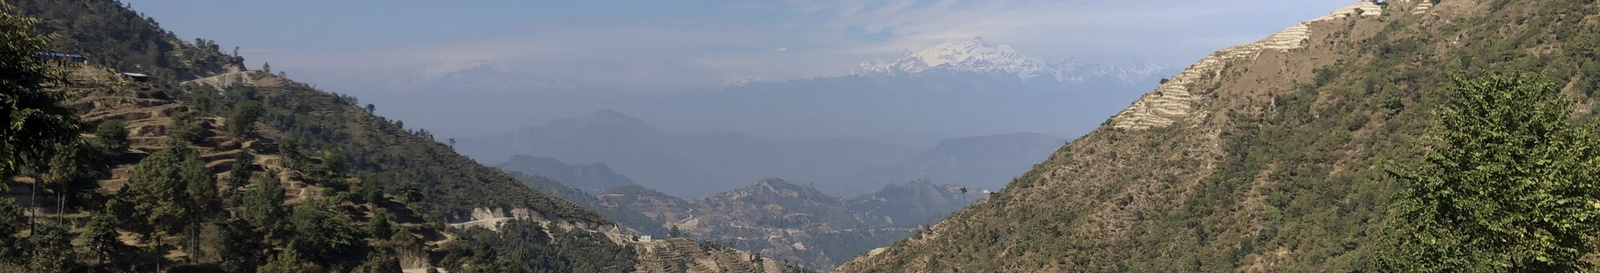 Himalayan mountains from a view